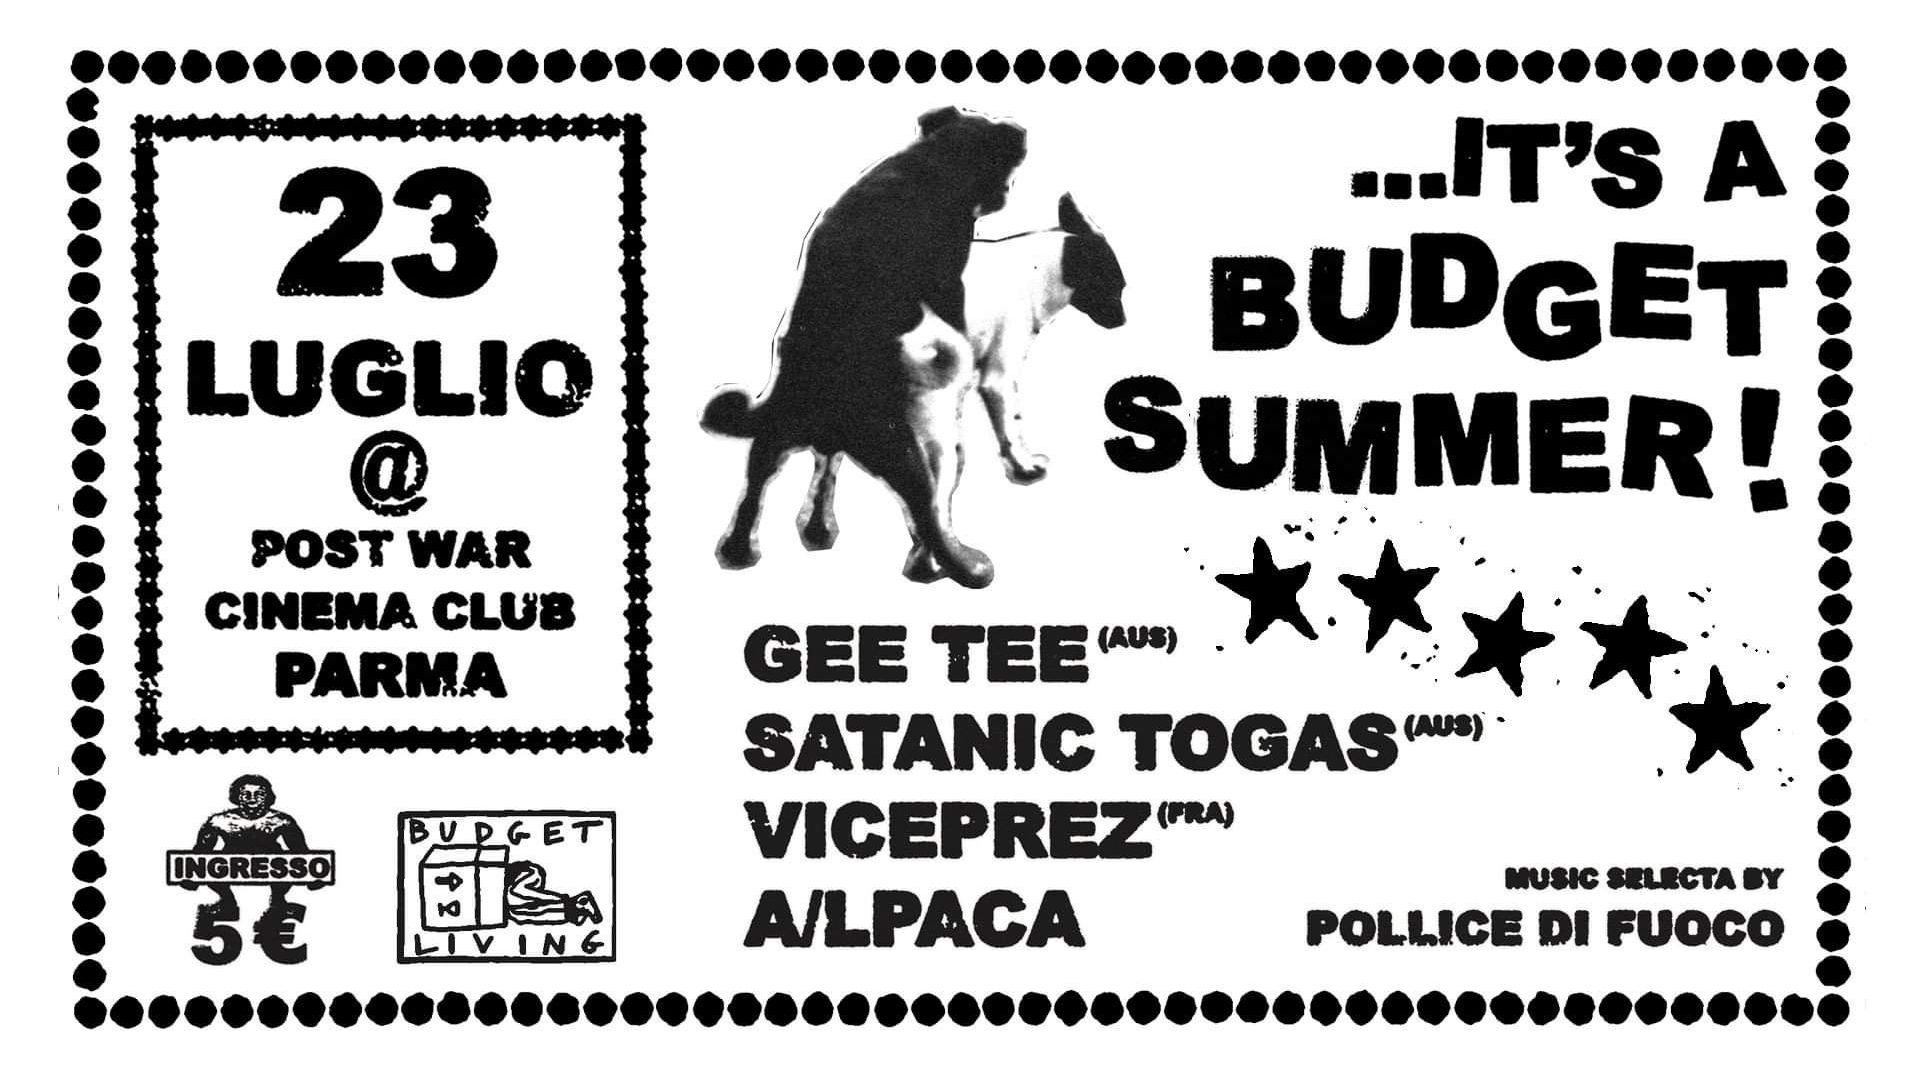 It's A Budget Summer! Gee Tee (Aus) & Satanic Togas (Aus) + Guests - Pwcc (Parma)